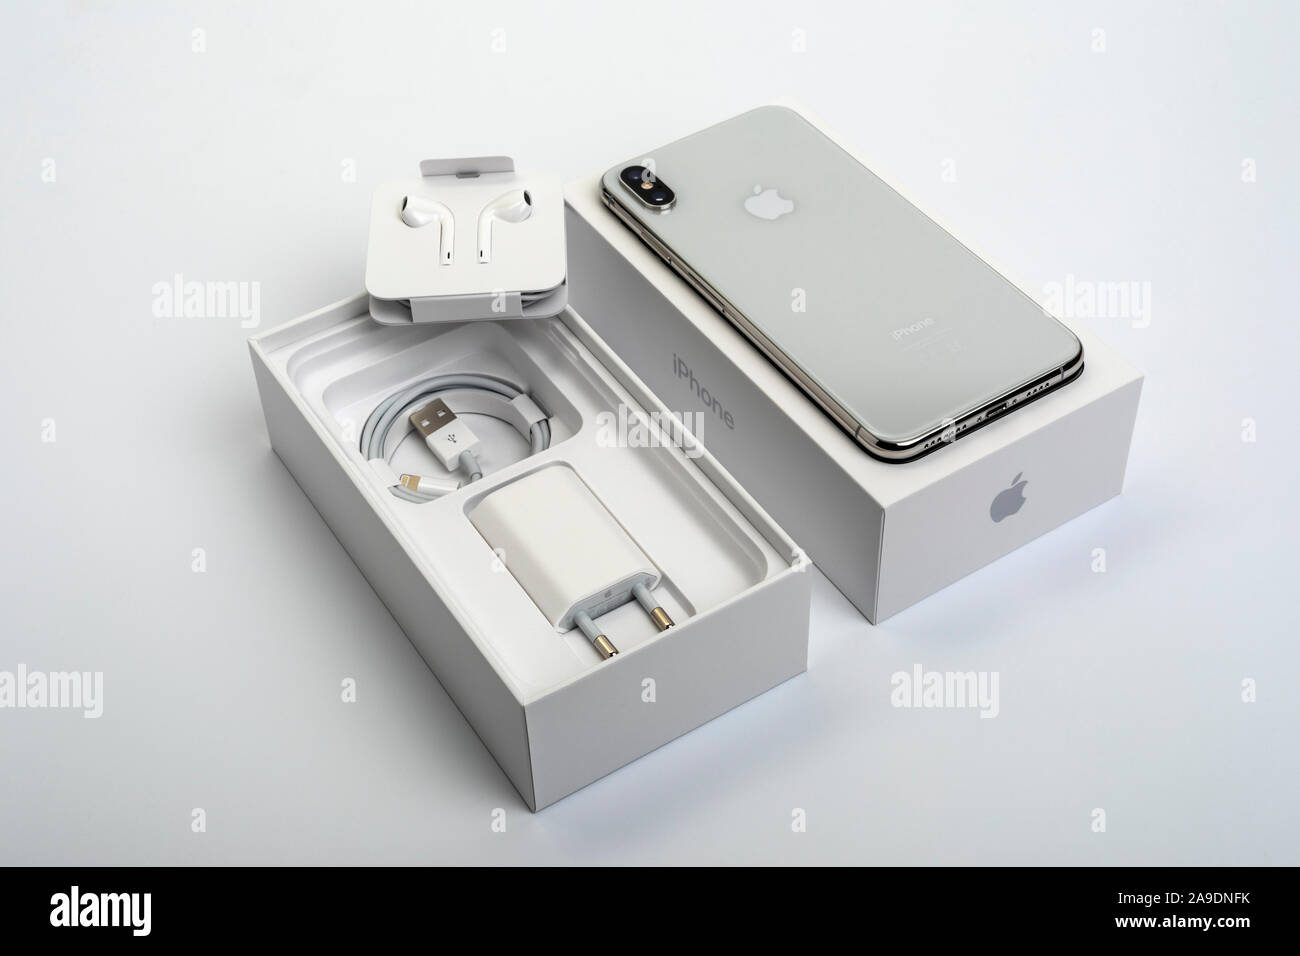 Apple iPhone XS Max, Packaging Open, iPhone XS Max, Back, Apple Accessories,  Headphones EarPods, Lightning USB Cable, USB Power Adapter Stock Photo -  Alamy